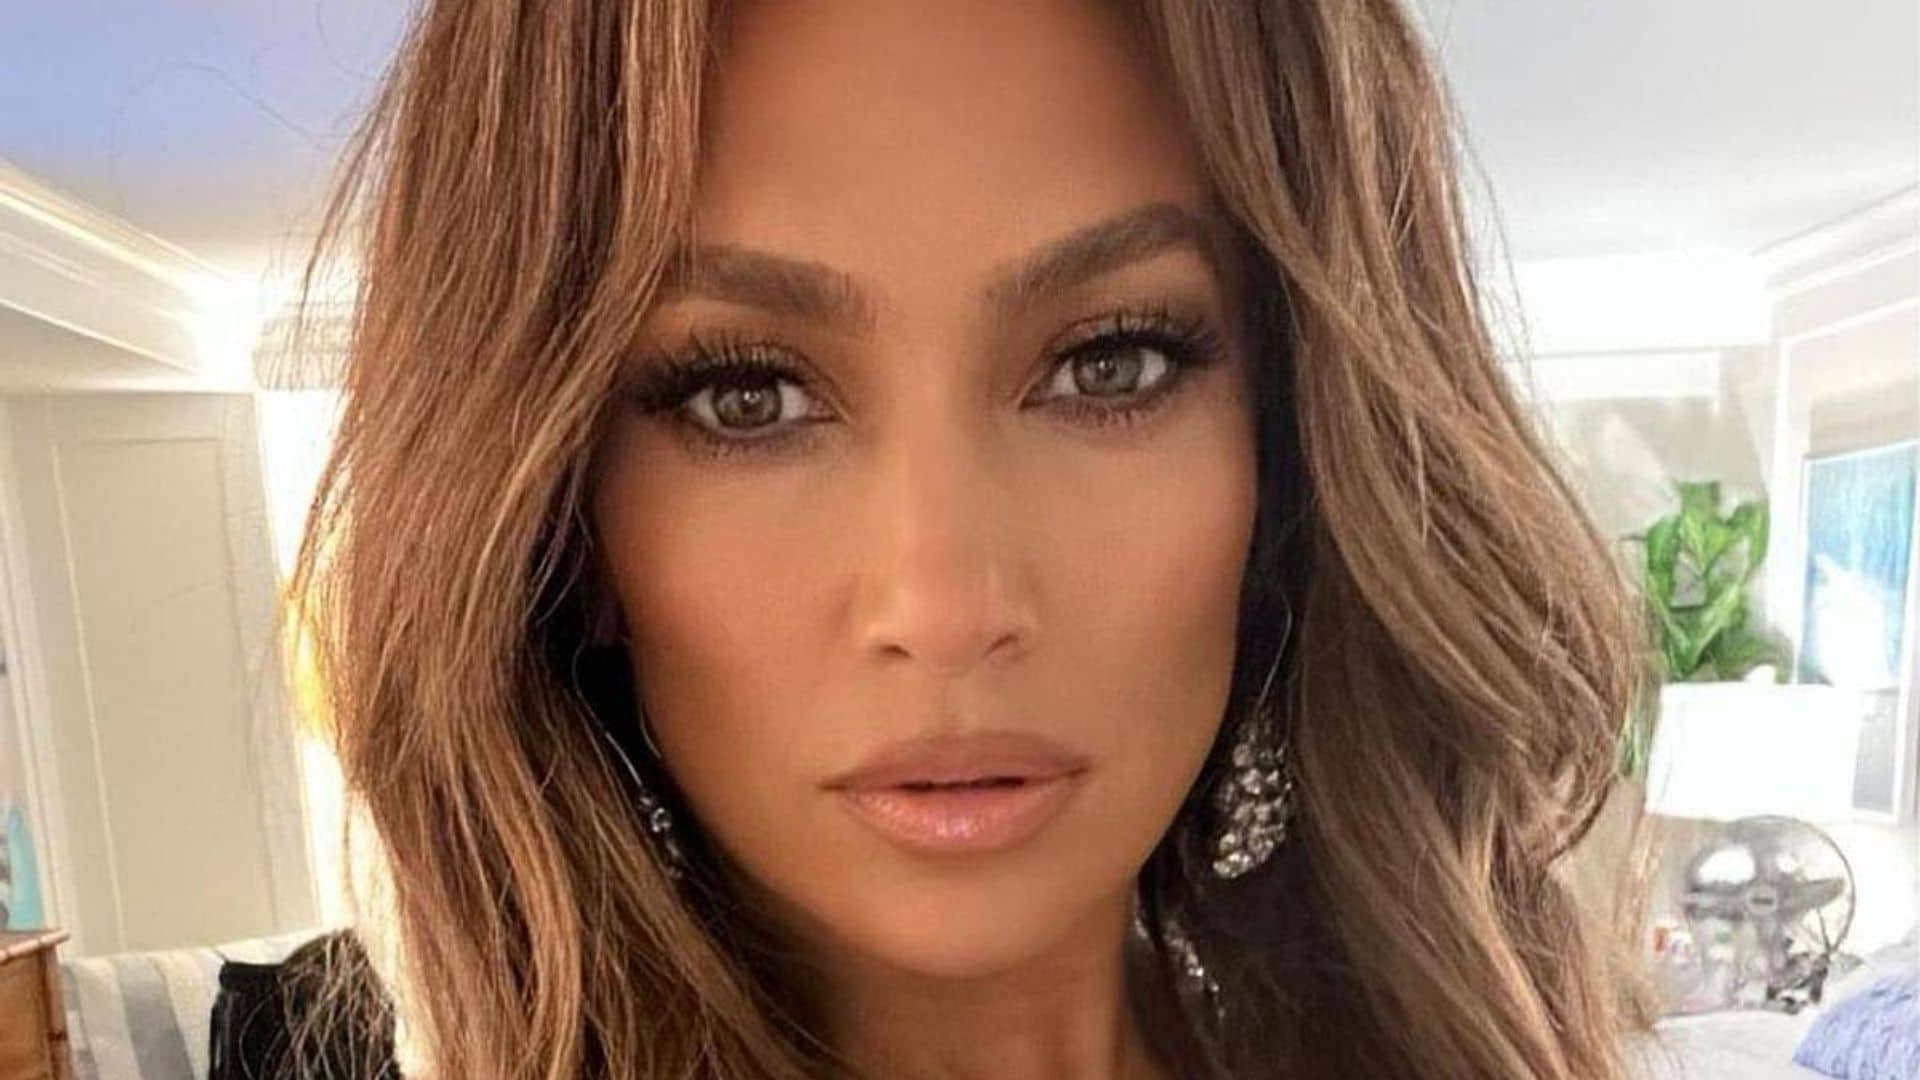 Jennifer Lopez looks stunning even after sleeping in yesterday’s makeup and here’s a photo to prove it